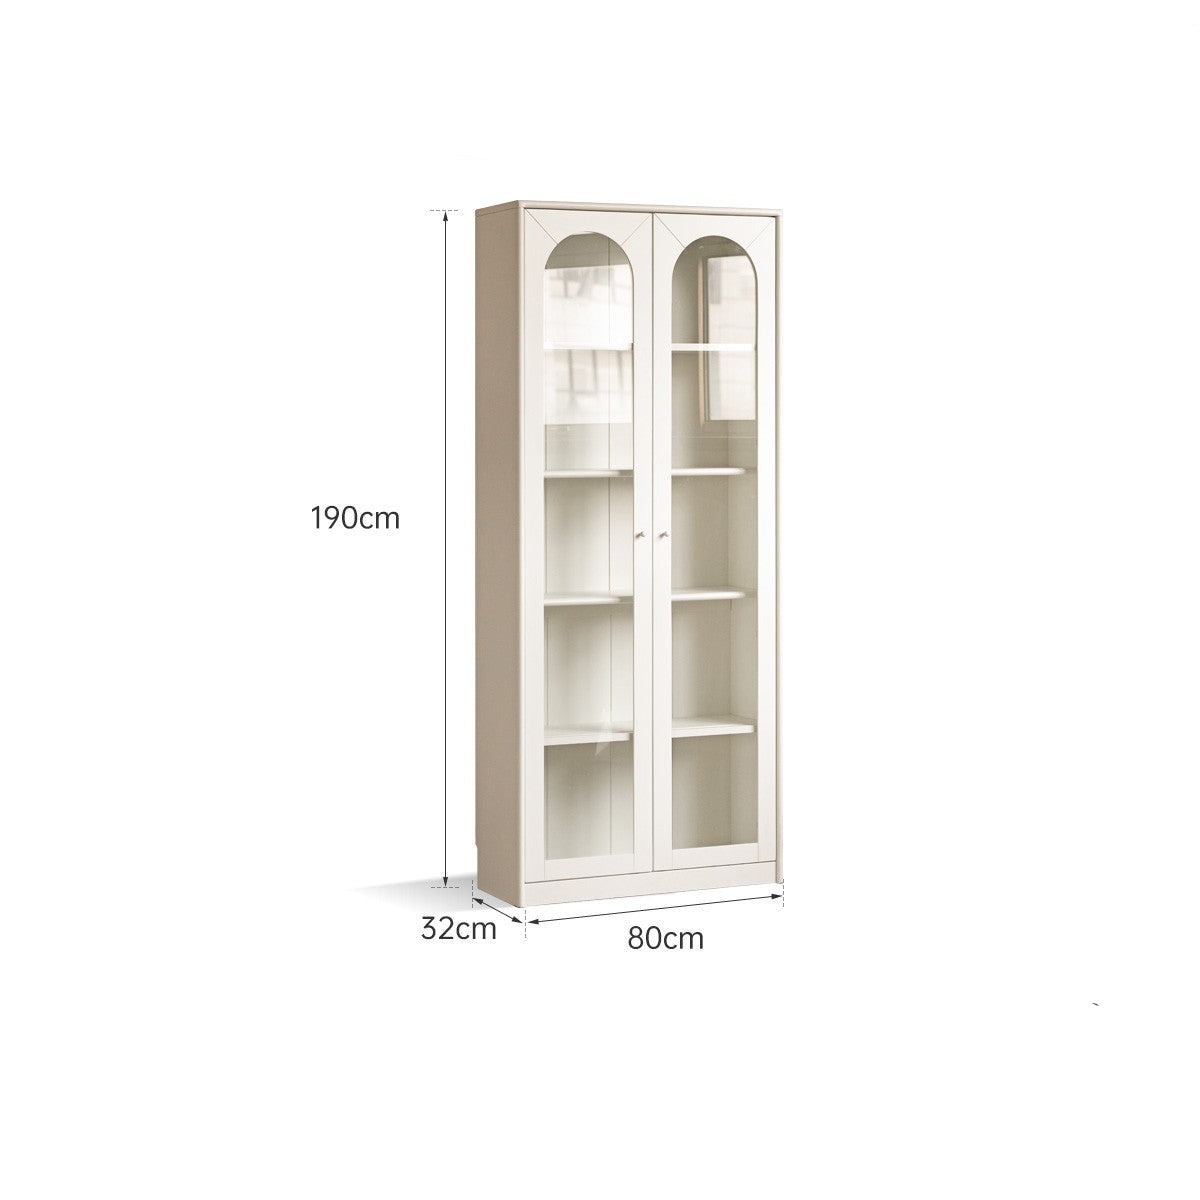 Poplar, birch solid wood bookcase white with glass door whole wall combination French cream style -